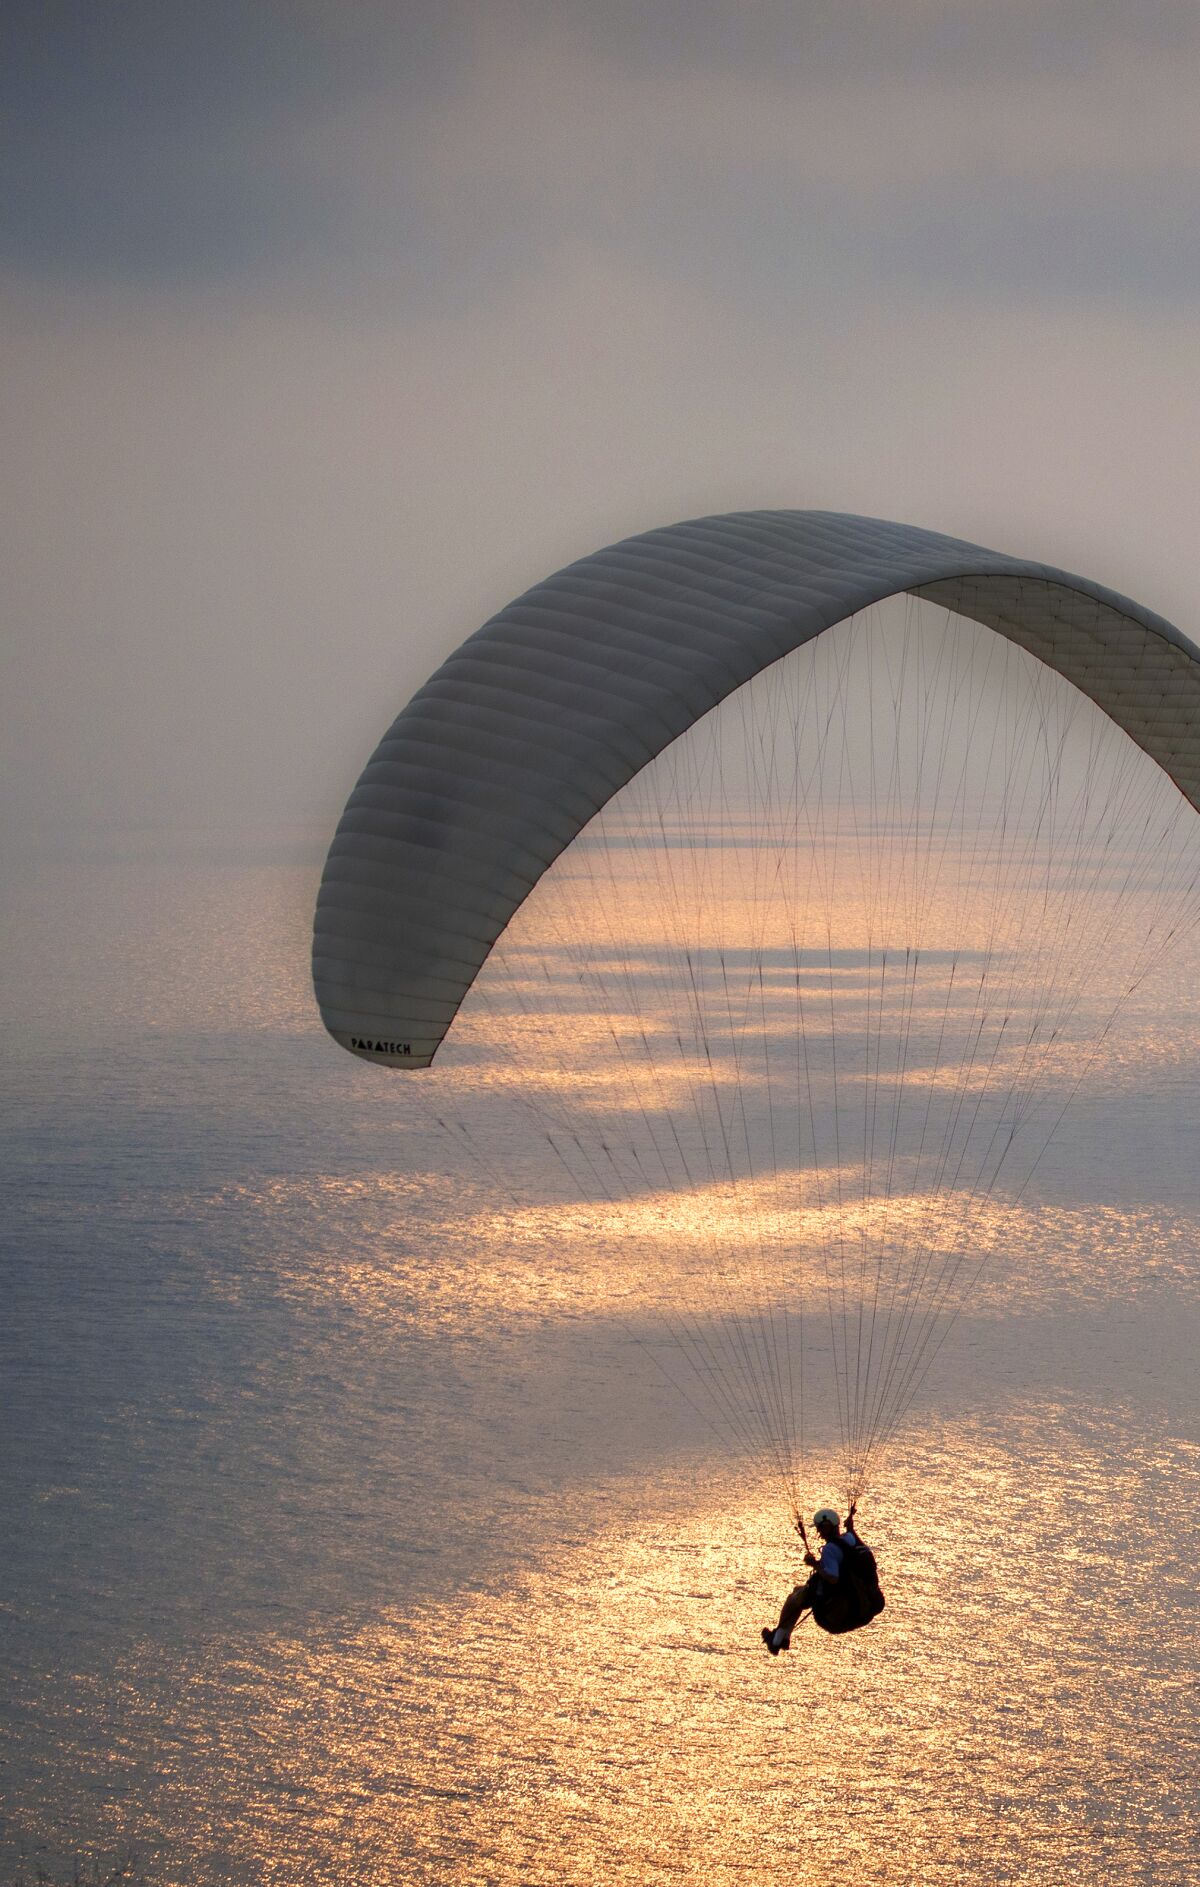 A paraglider takes flight at sunset over the ocean at Torrey Pines Gliderport in La Jolla.